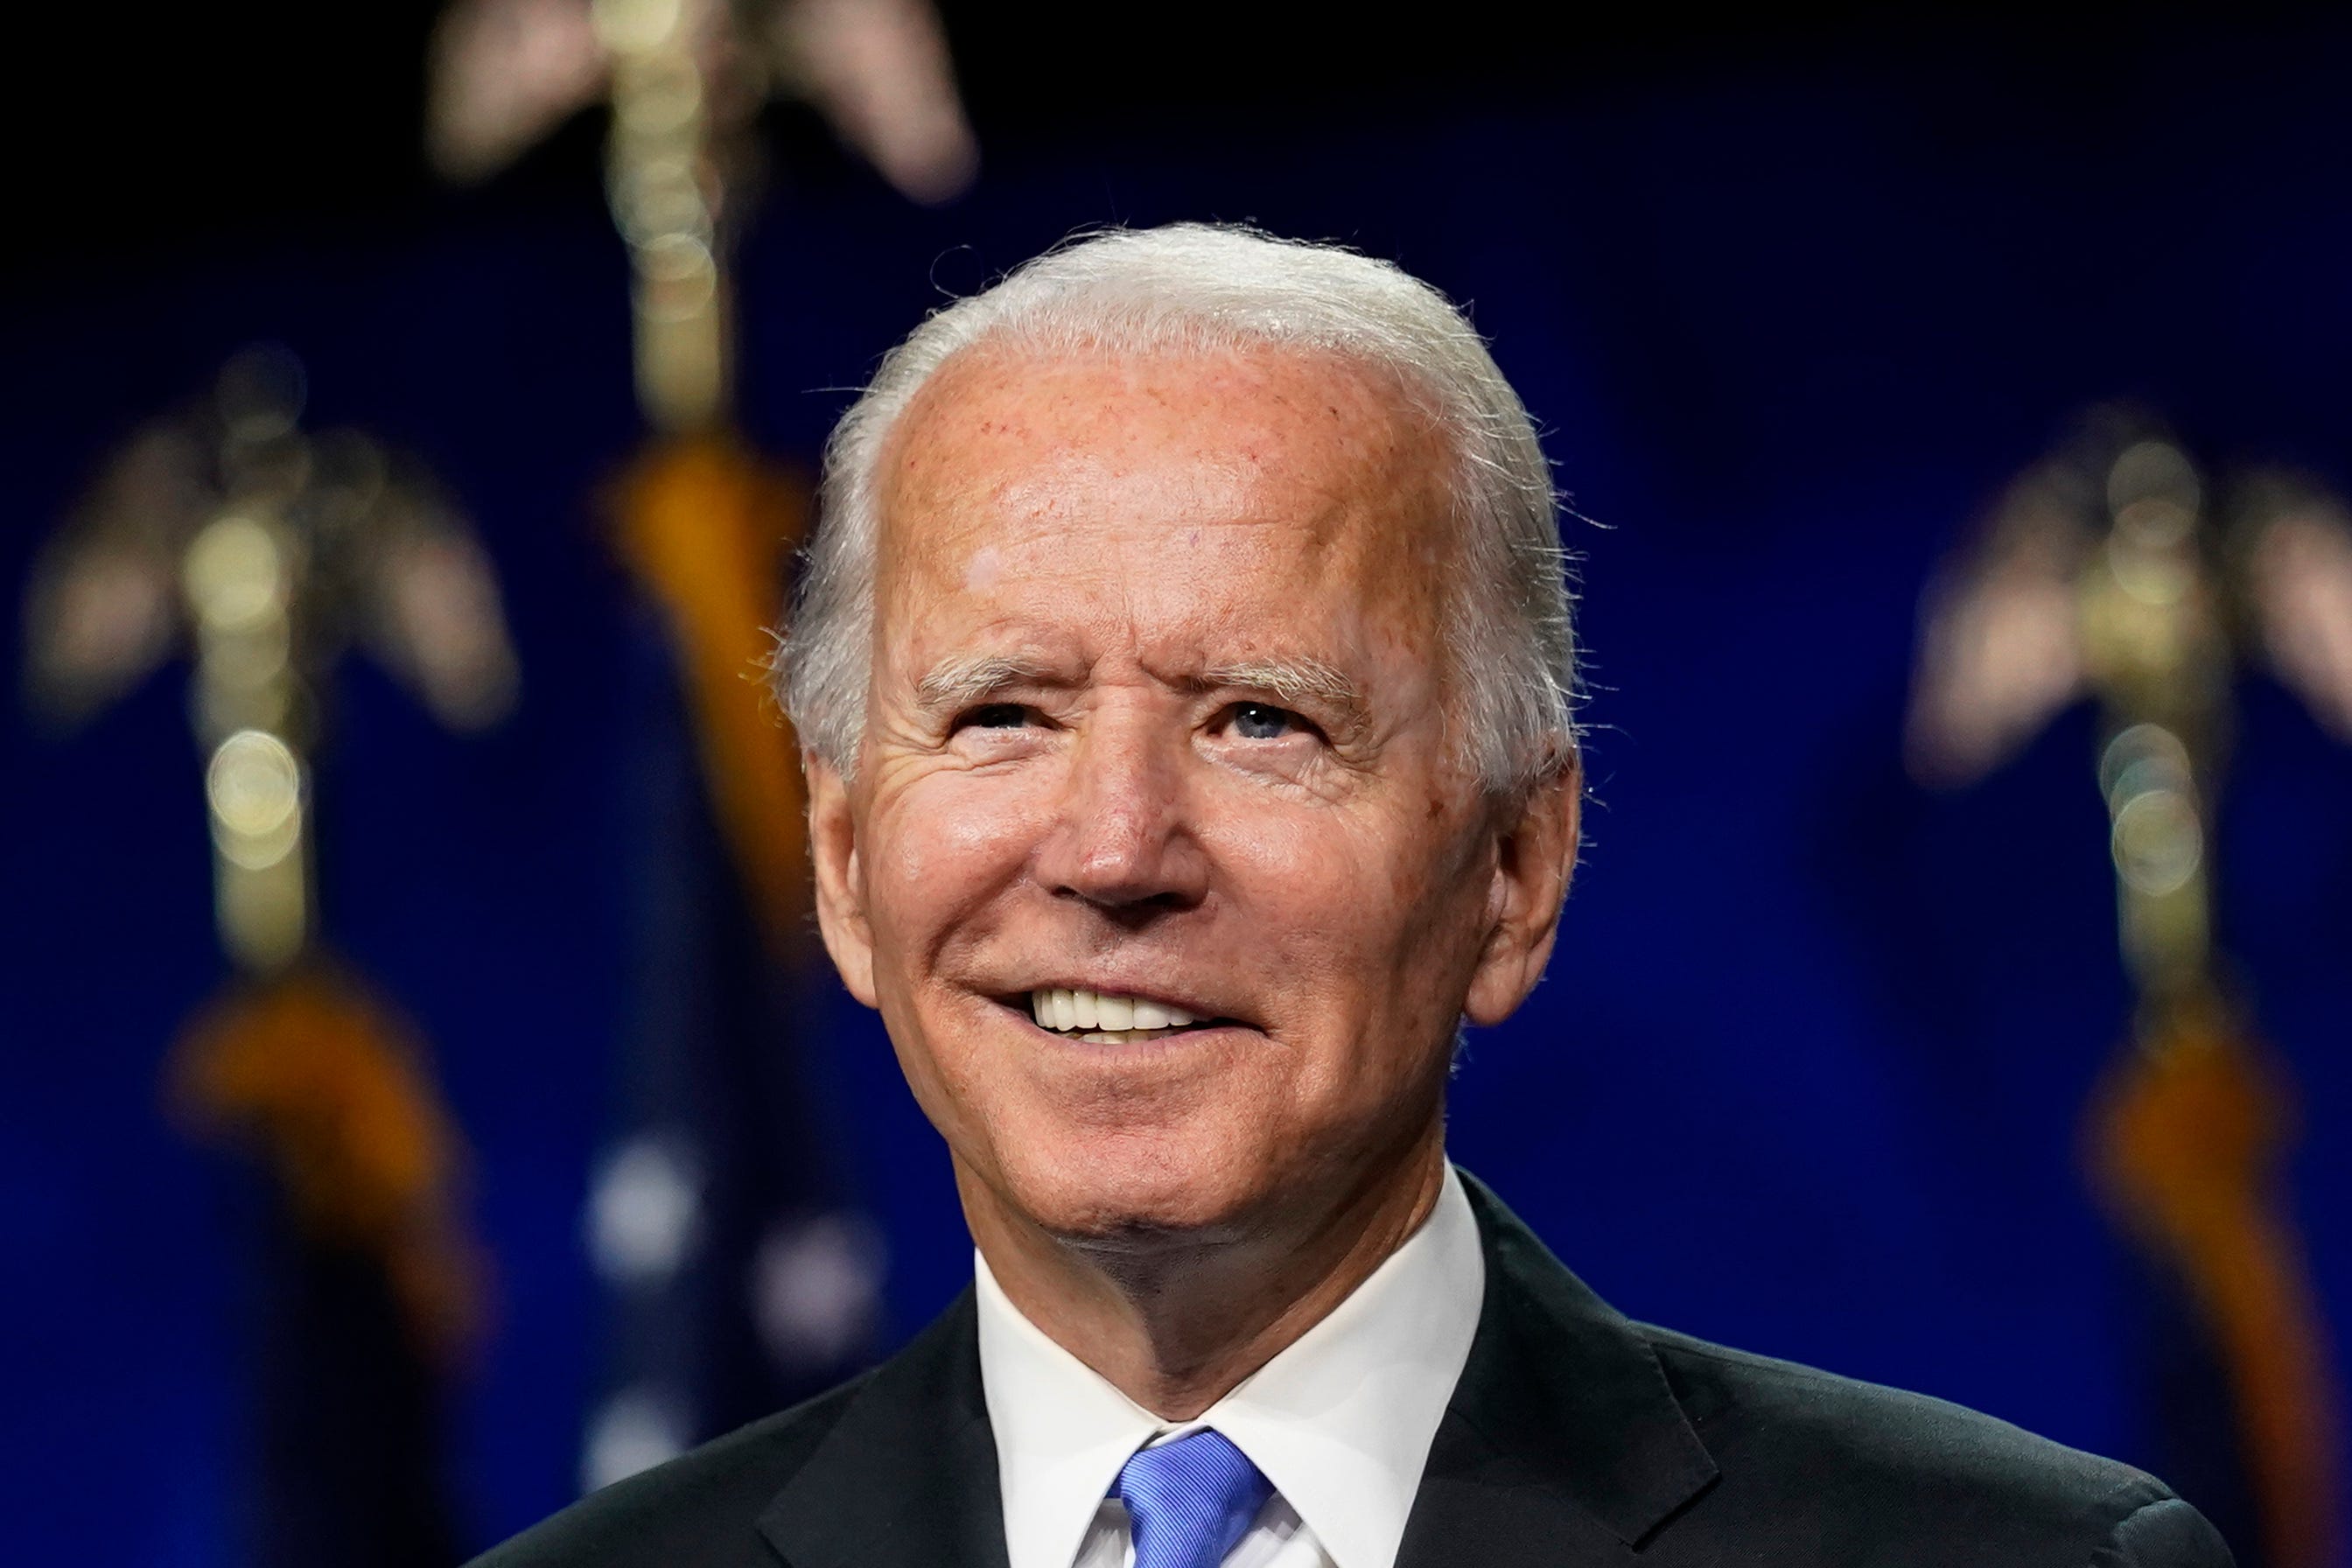 if joe biden runs for president who will be his vice president - Biden|President|Joe|States|Delaware|Obama|Vice|Senate|Campaign|Election|Time|Administration|House|Law|People|Years|Family|Year|Trump|School|University|Senator|Office|Party|Country|Committee|Act|War|Days|Climate|Hunter|Health|America|State|Day|Democrats|Americans|Documents|Care|Plan|United States|Vice President|White House|Joe Biden|Biden Administration|Democratic Party|Law School|Presidential Election|President Joe Biden|Executive Orders|Foreign Relations Committee|Presidential Campaign|Second Term|47Th Vice President|Syracuse University|Climate Change|Hillary Clinton|Last Year|Barack Obama|Joseph Robinette Biden|U.S. Senator|Health Care|U.S. Senate|Donald Trump|President Trump|President Biden|Federal Register|Judiciary Committee|Presidential Nomination|Presidential Medal